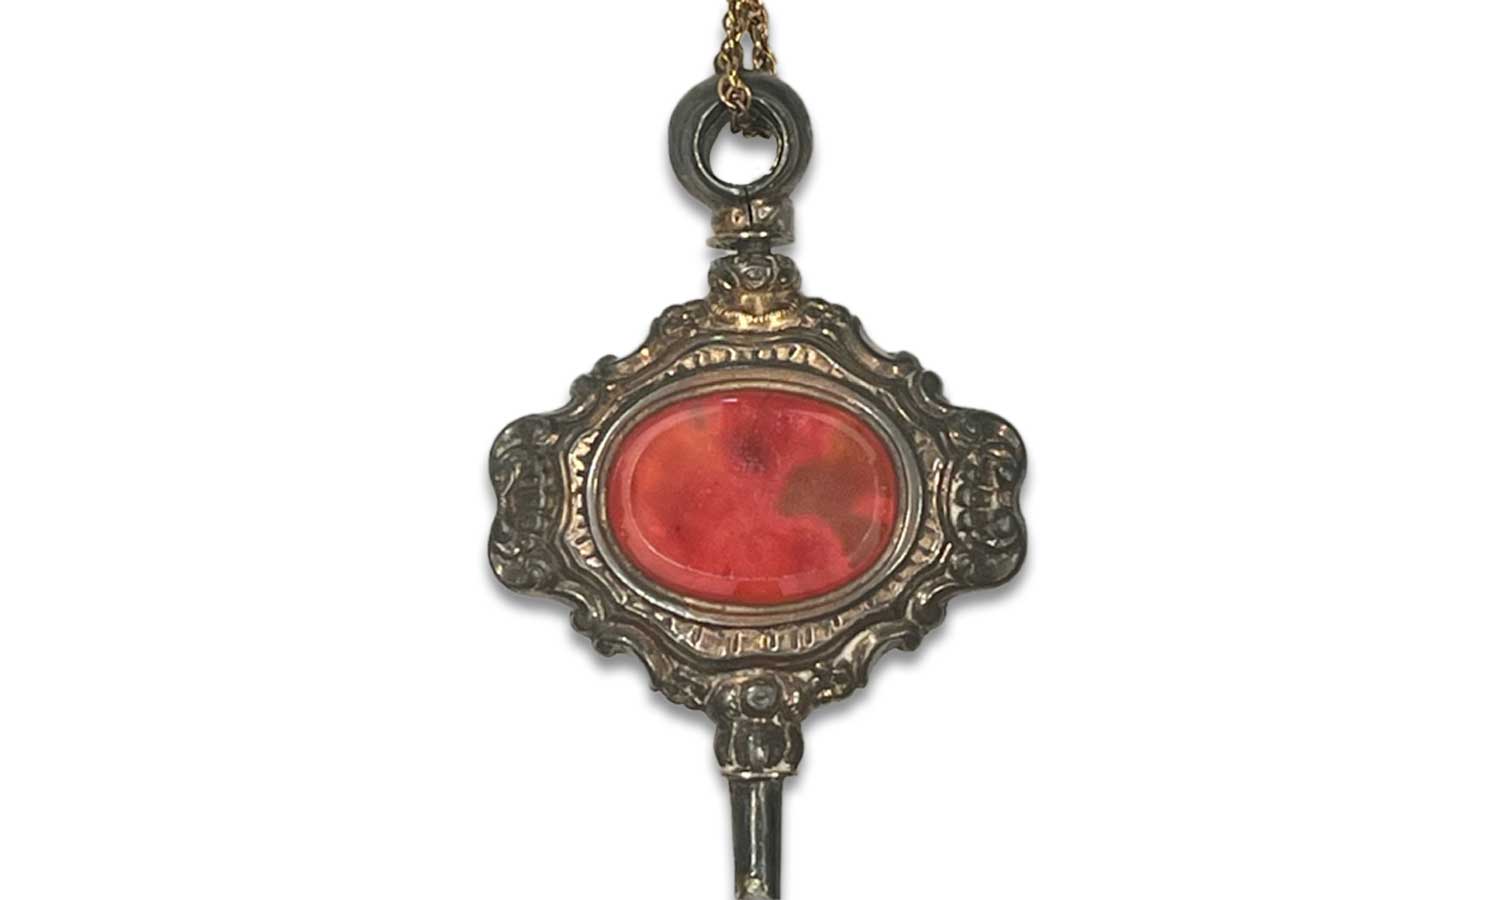 Pocket Watch Key With A Hair Memento - Art of Mourning